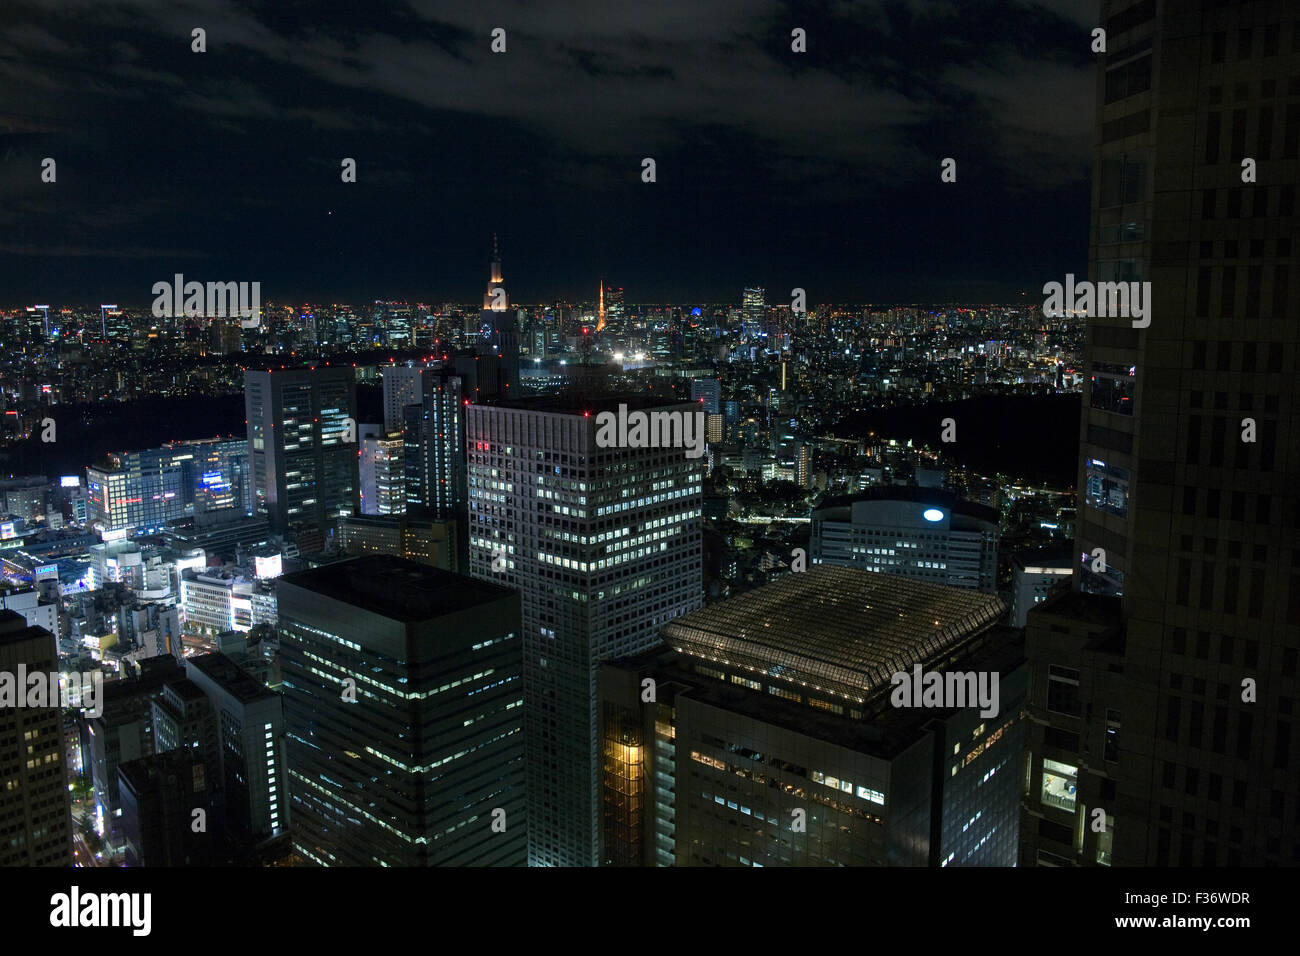 Night city scape seen from above office buildings in Tokyo, Japan Stock Photo